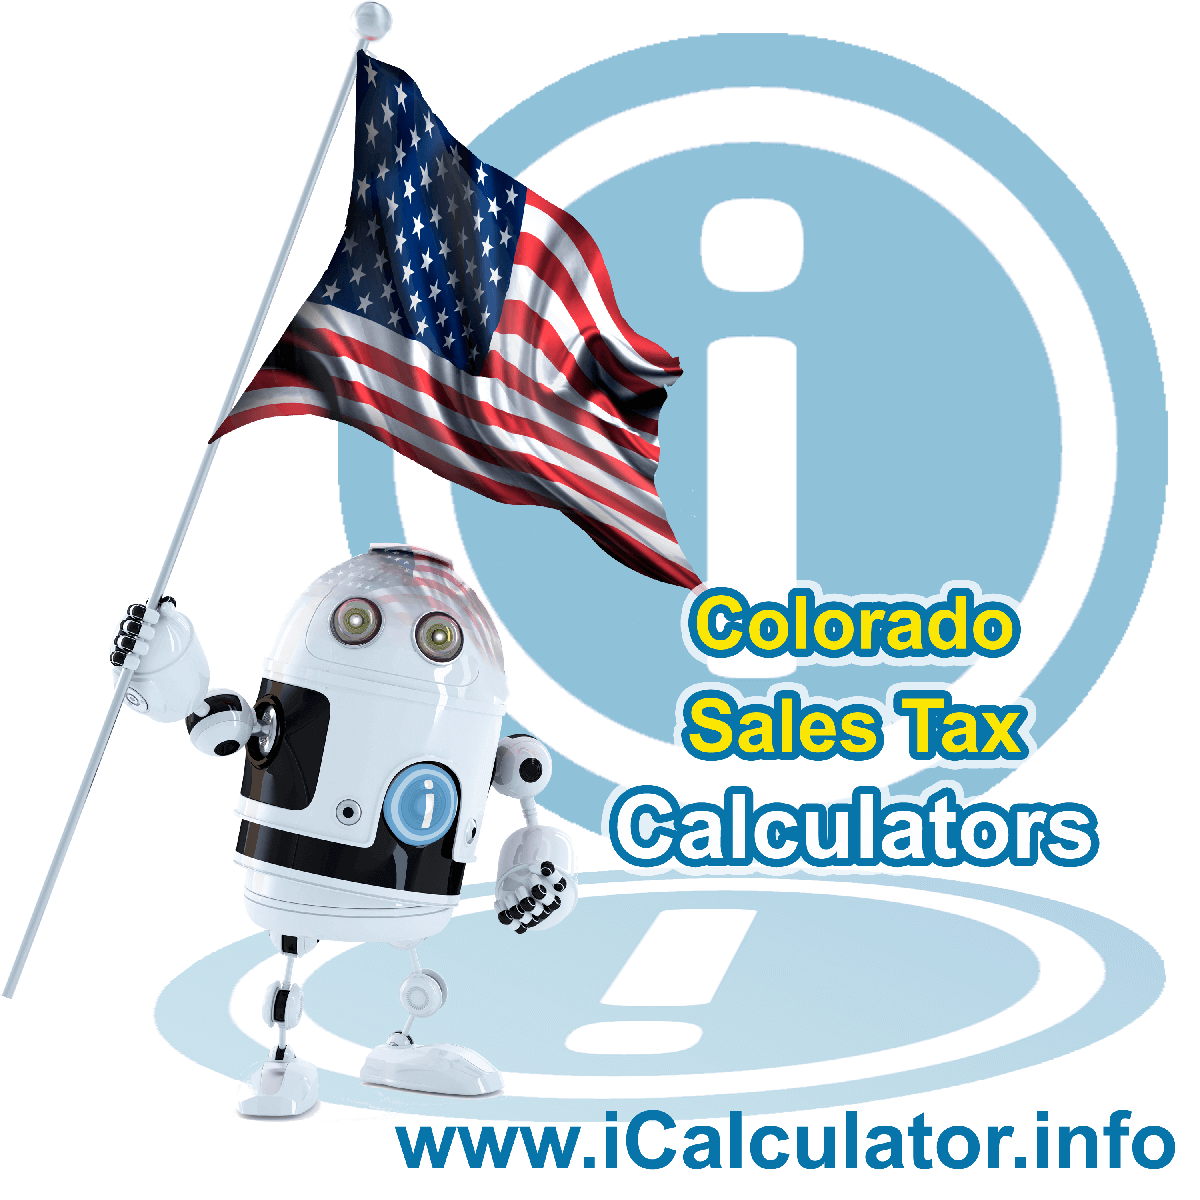 Thornton Sales Rates: This image illustrates a calculator robot calculating Thornton sales tax manually using the Thornton Sales Tax Formula. You can use this information to calculate Thornton Sales Tax manually or use the Thornton Sales Tax Calculator to calculate sales tax online.